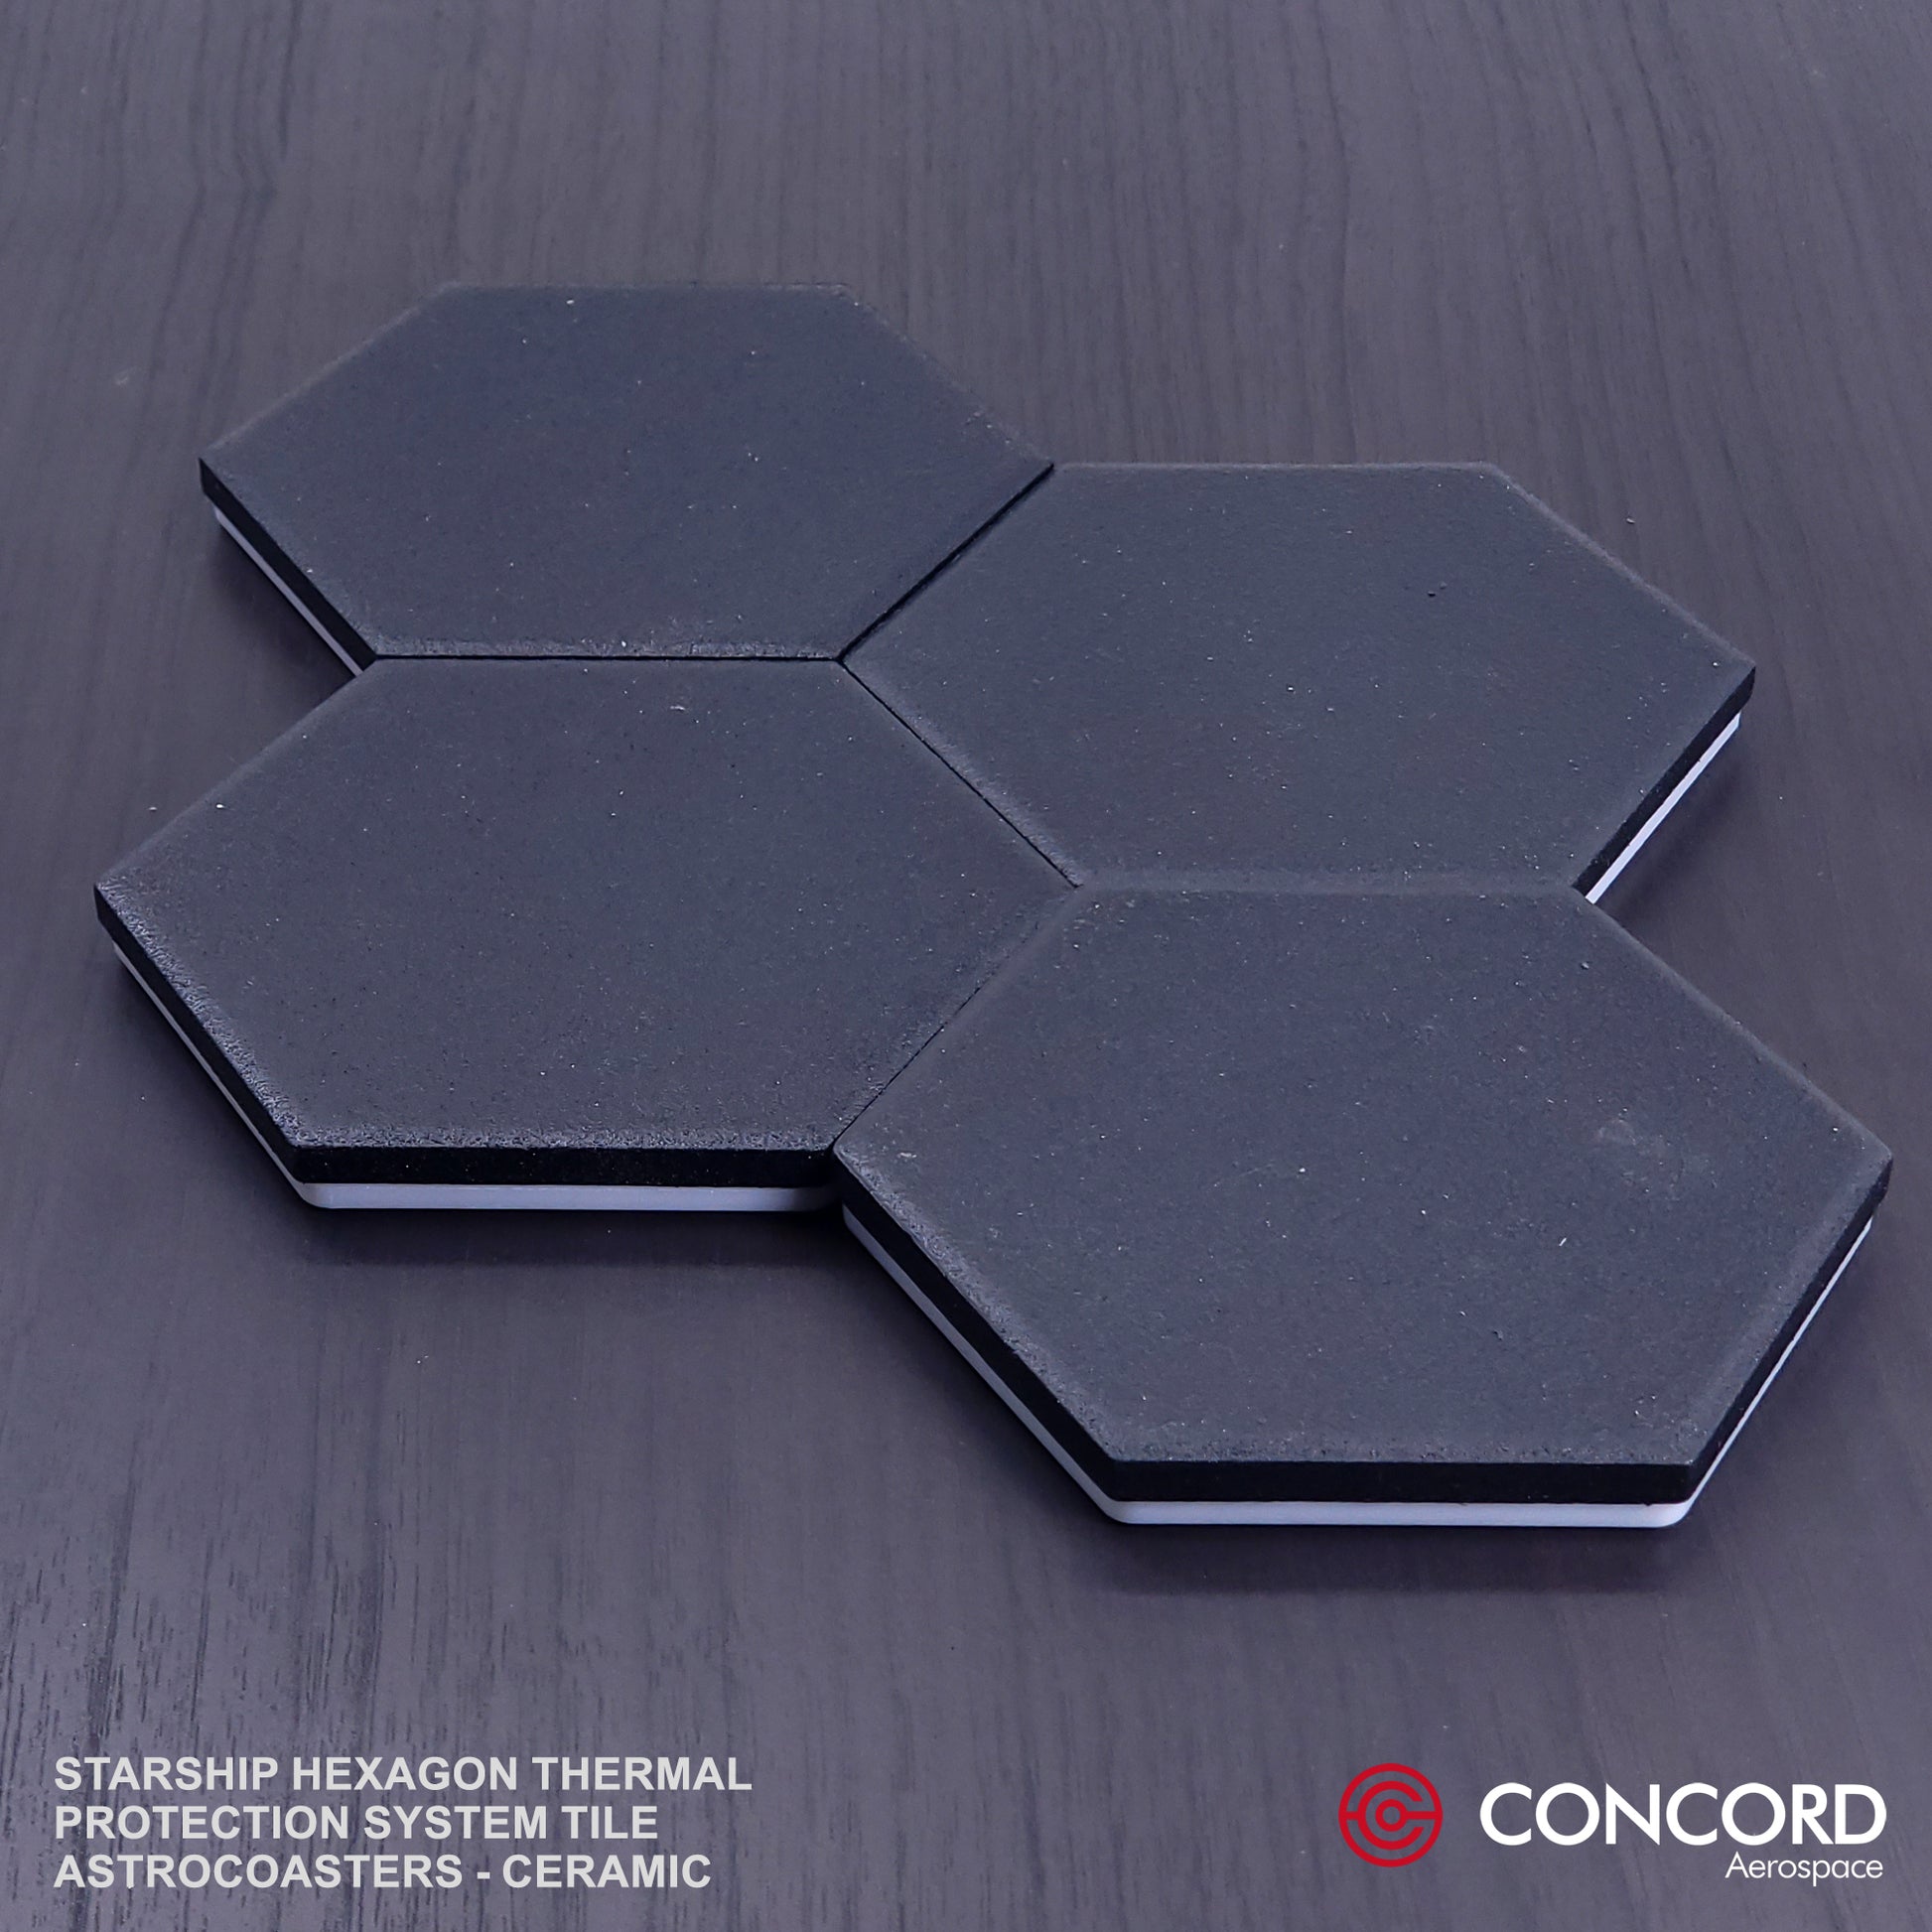 STARSHIP HEXAGON THERMAL PROTECTION SYSTEM TILE ASTROCOASTER - Concord Aerospace